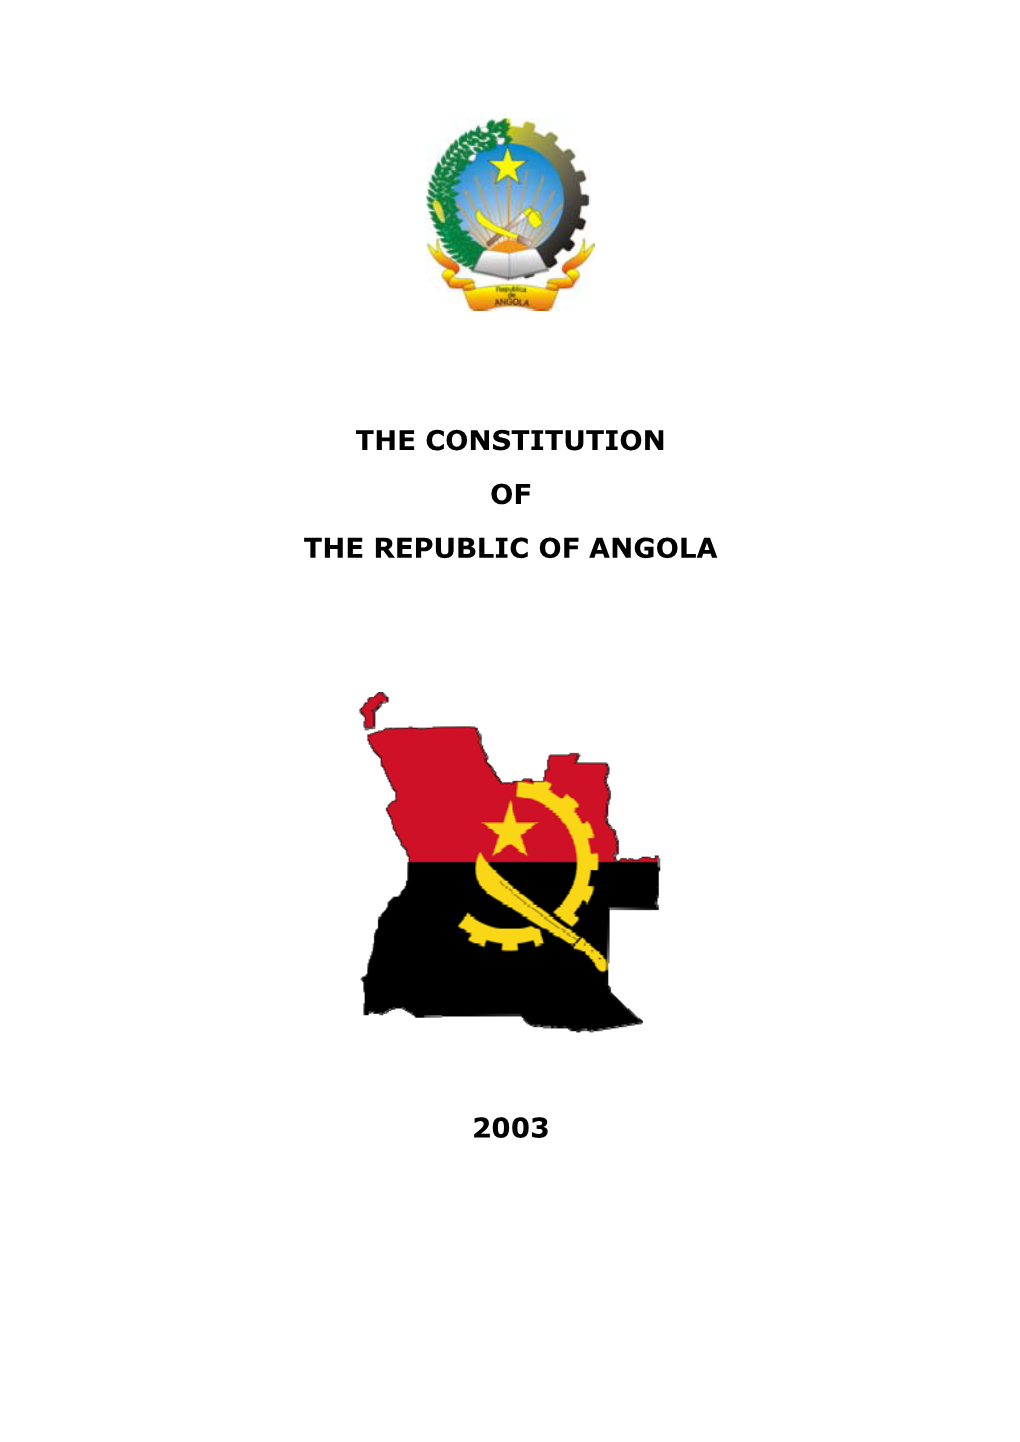 The Constitution of the Republic of Angola 2003